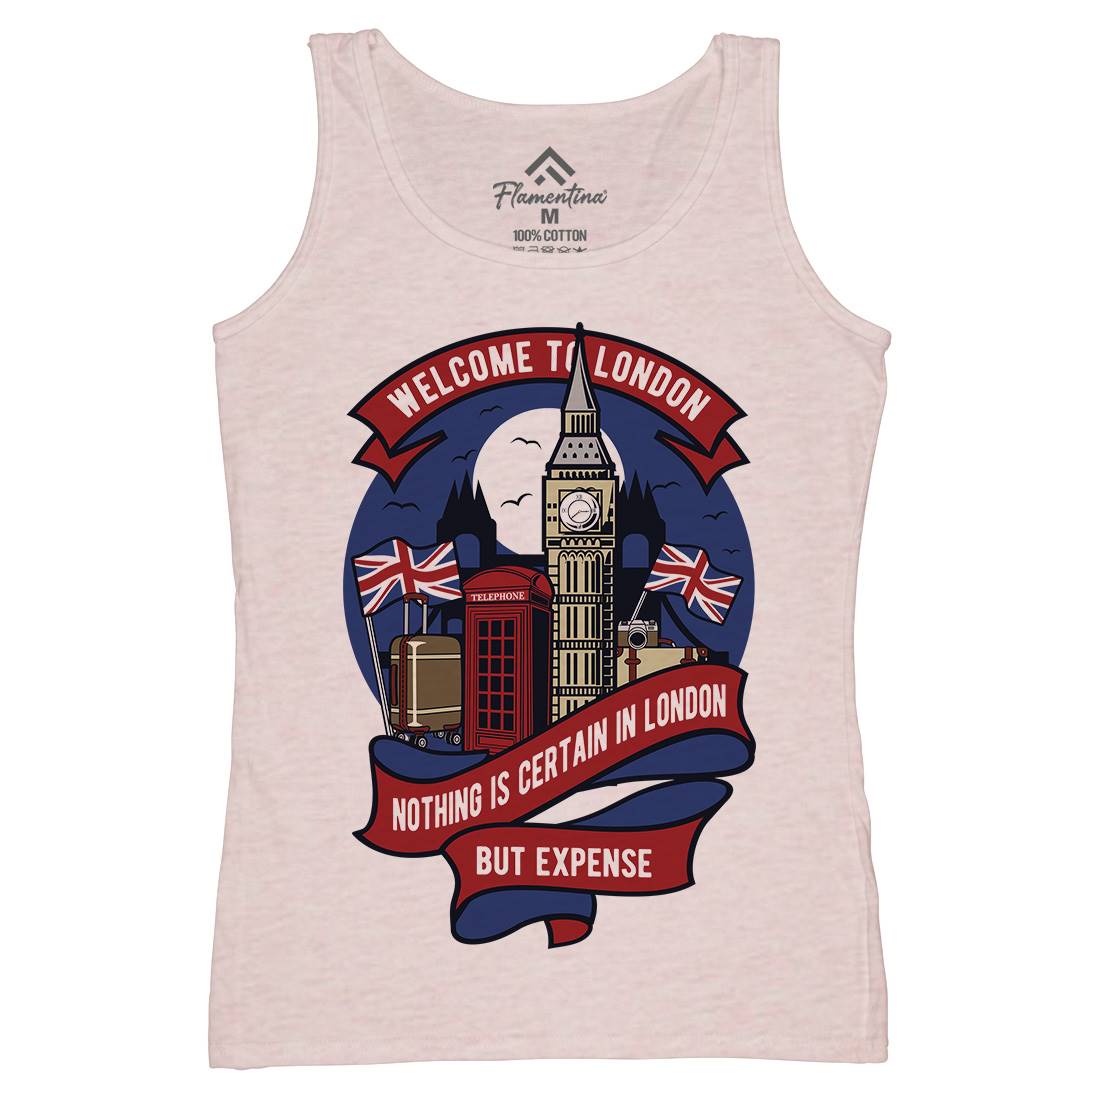 Welcome To London Womens Organic Tank Top Vest Retro D596